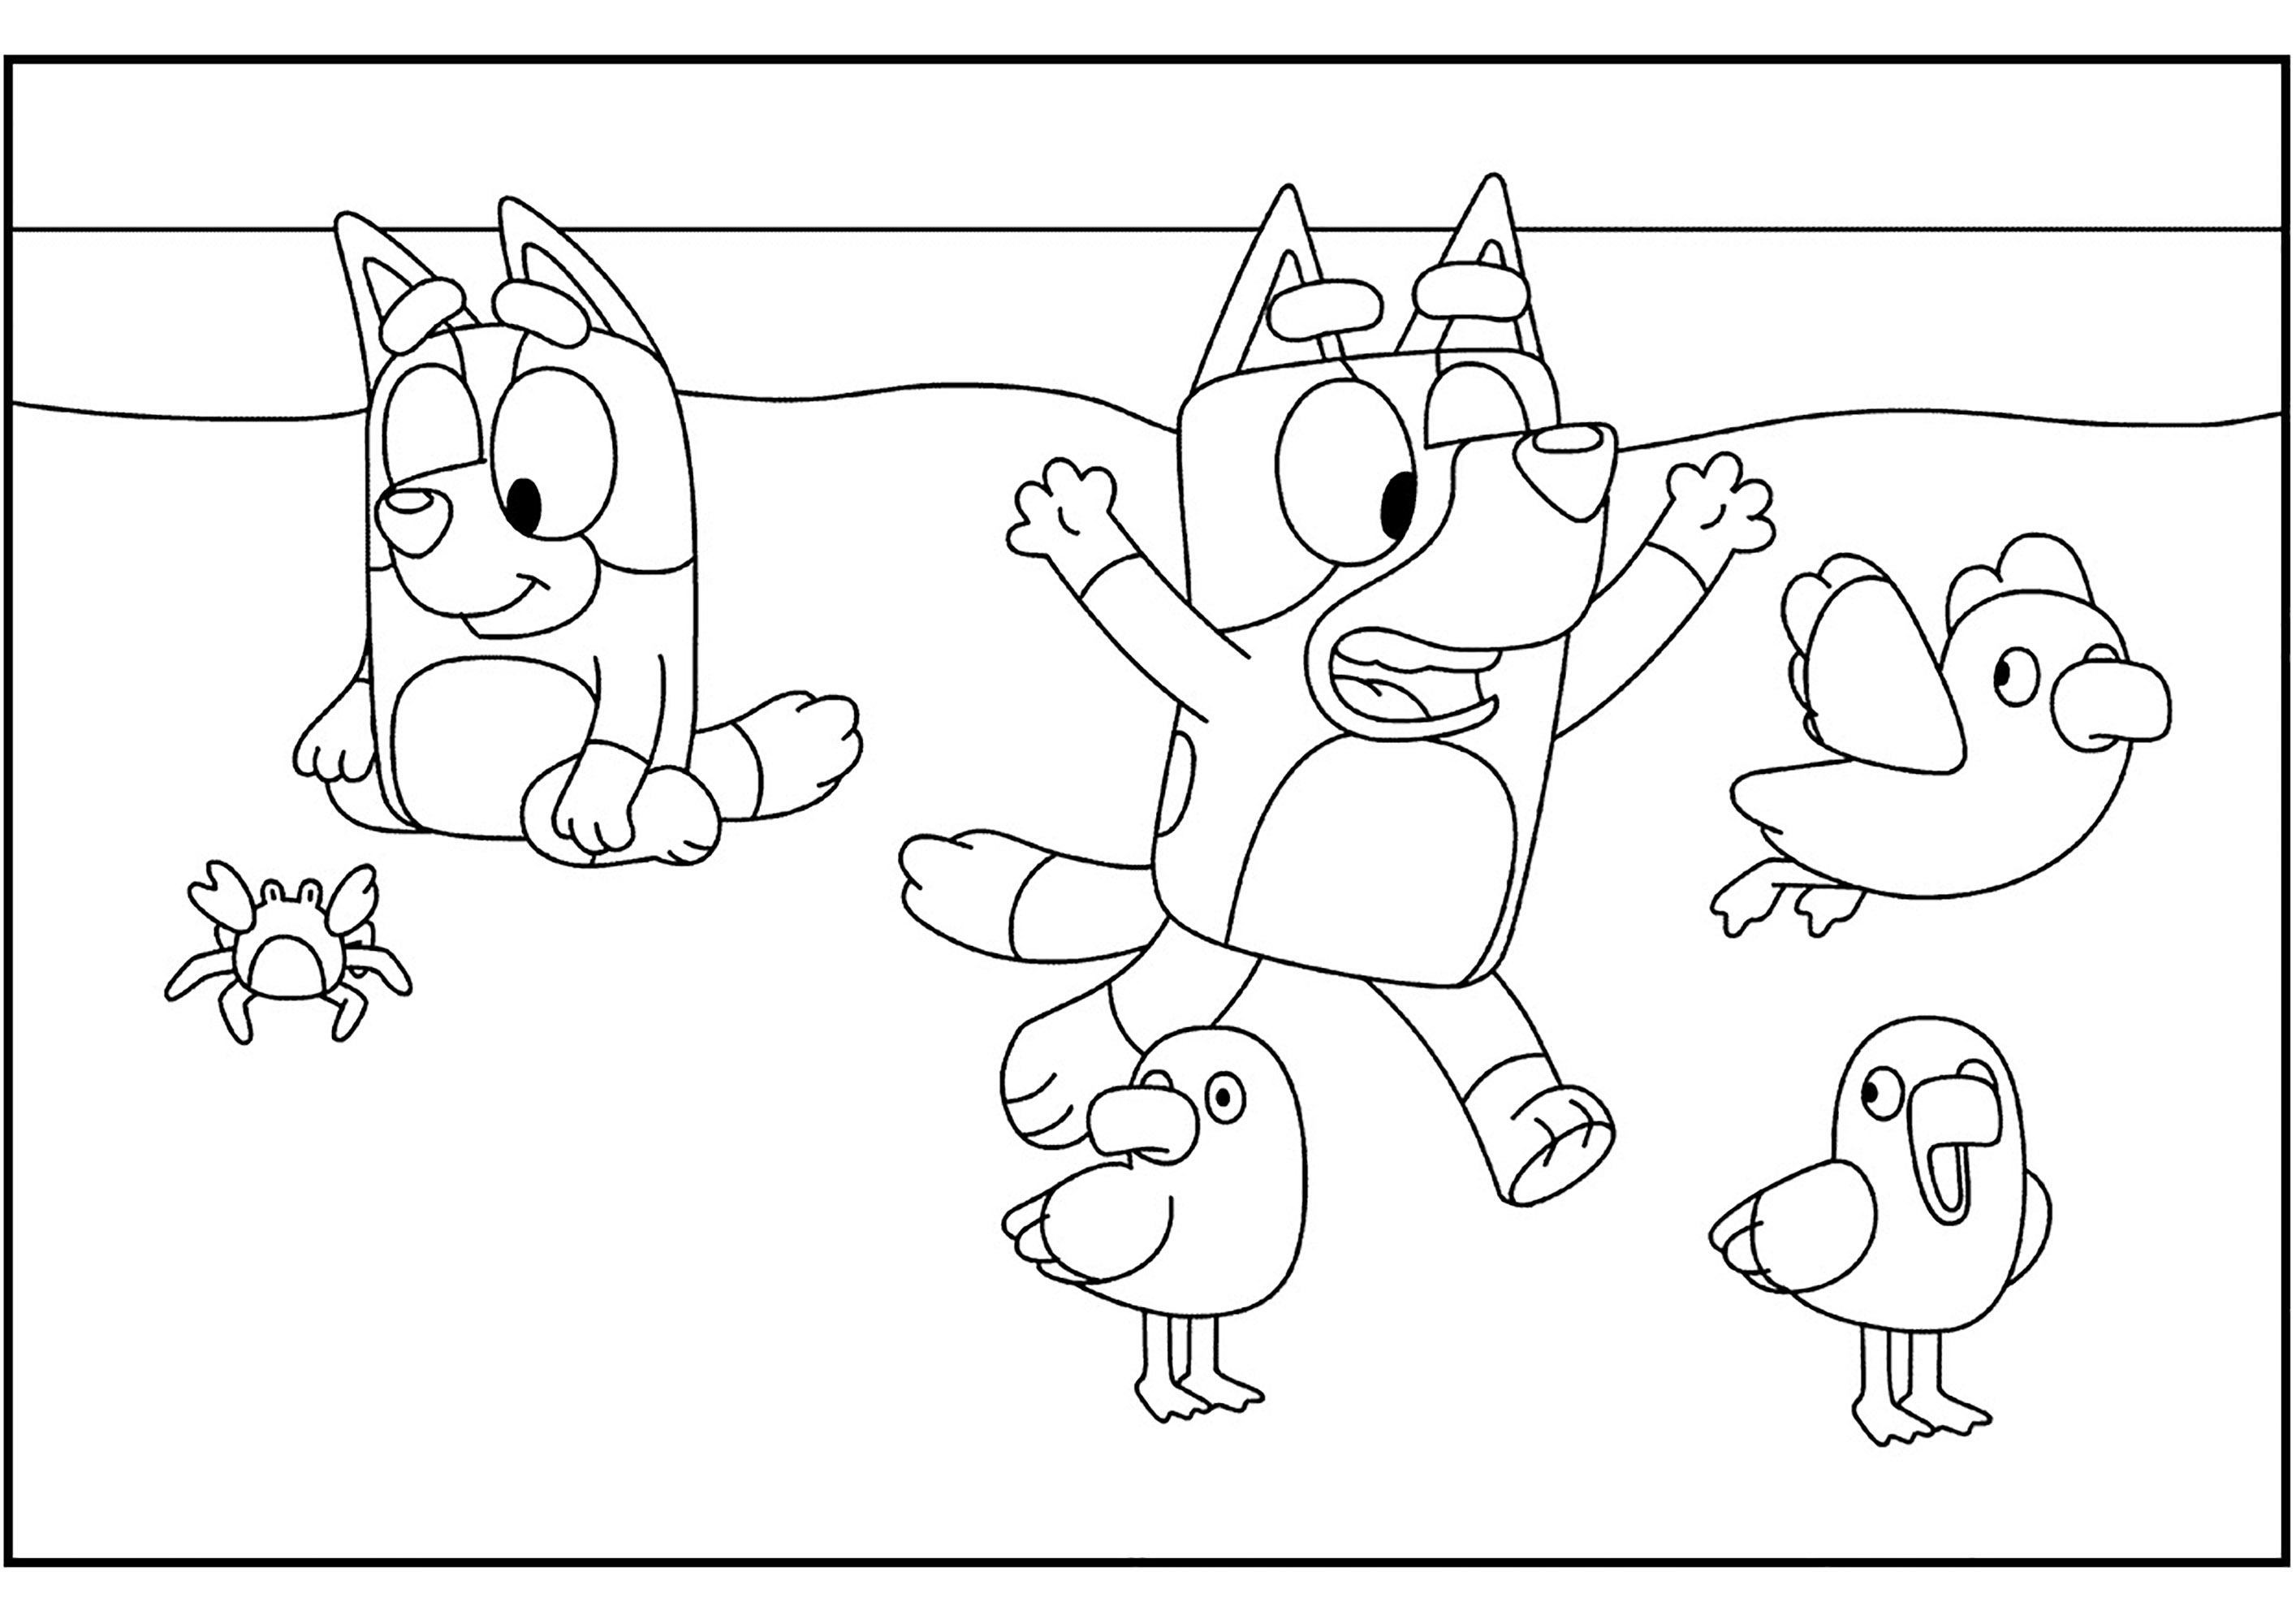 Simple coloring page of Bluey: Bluey and birds